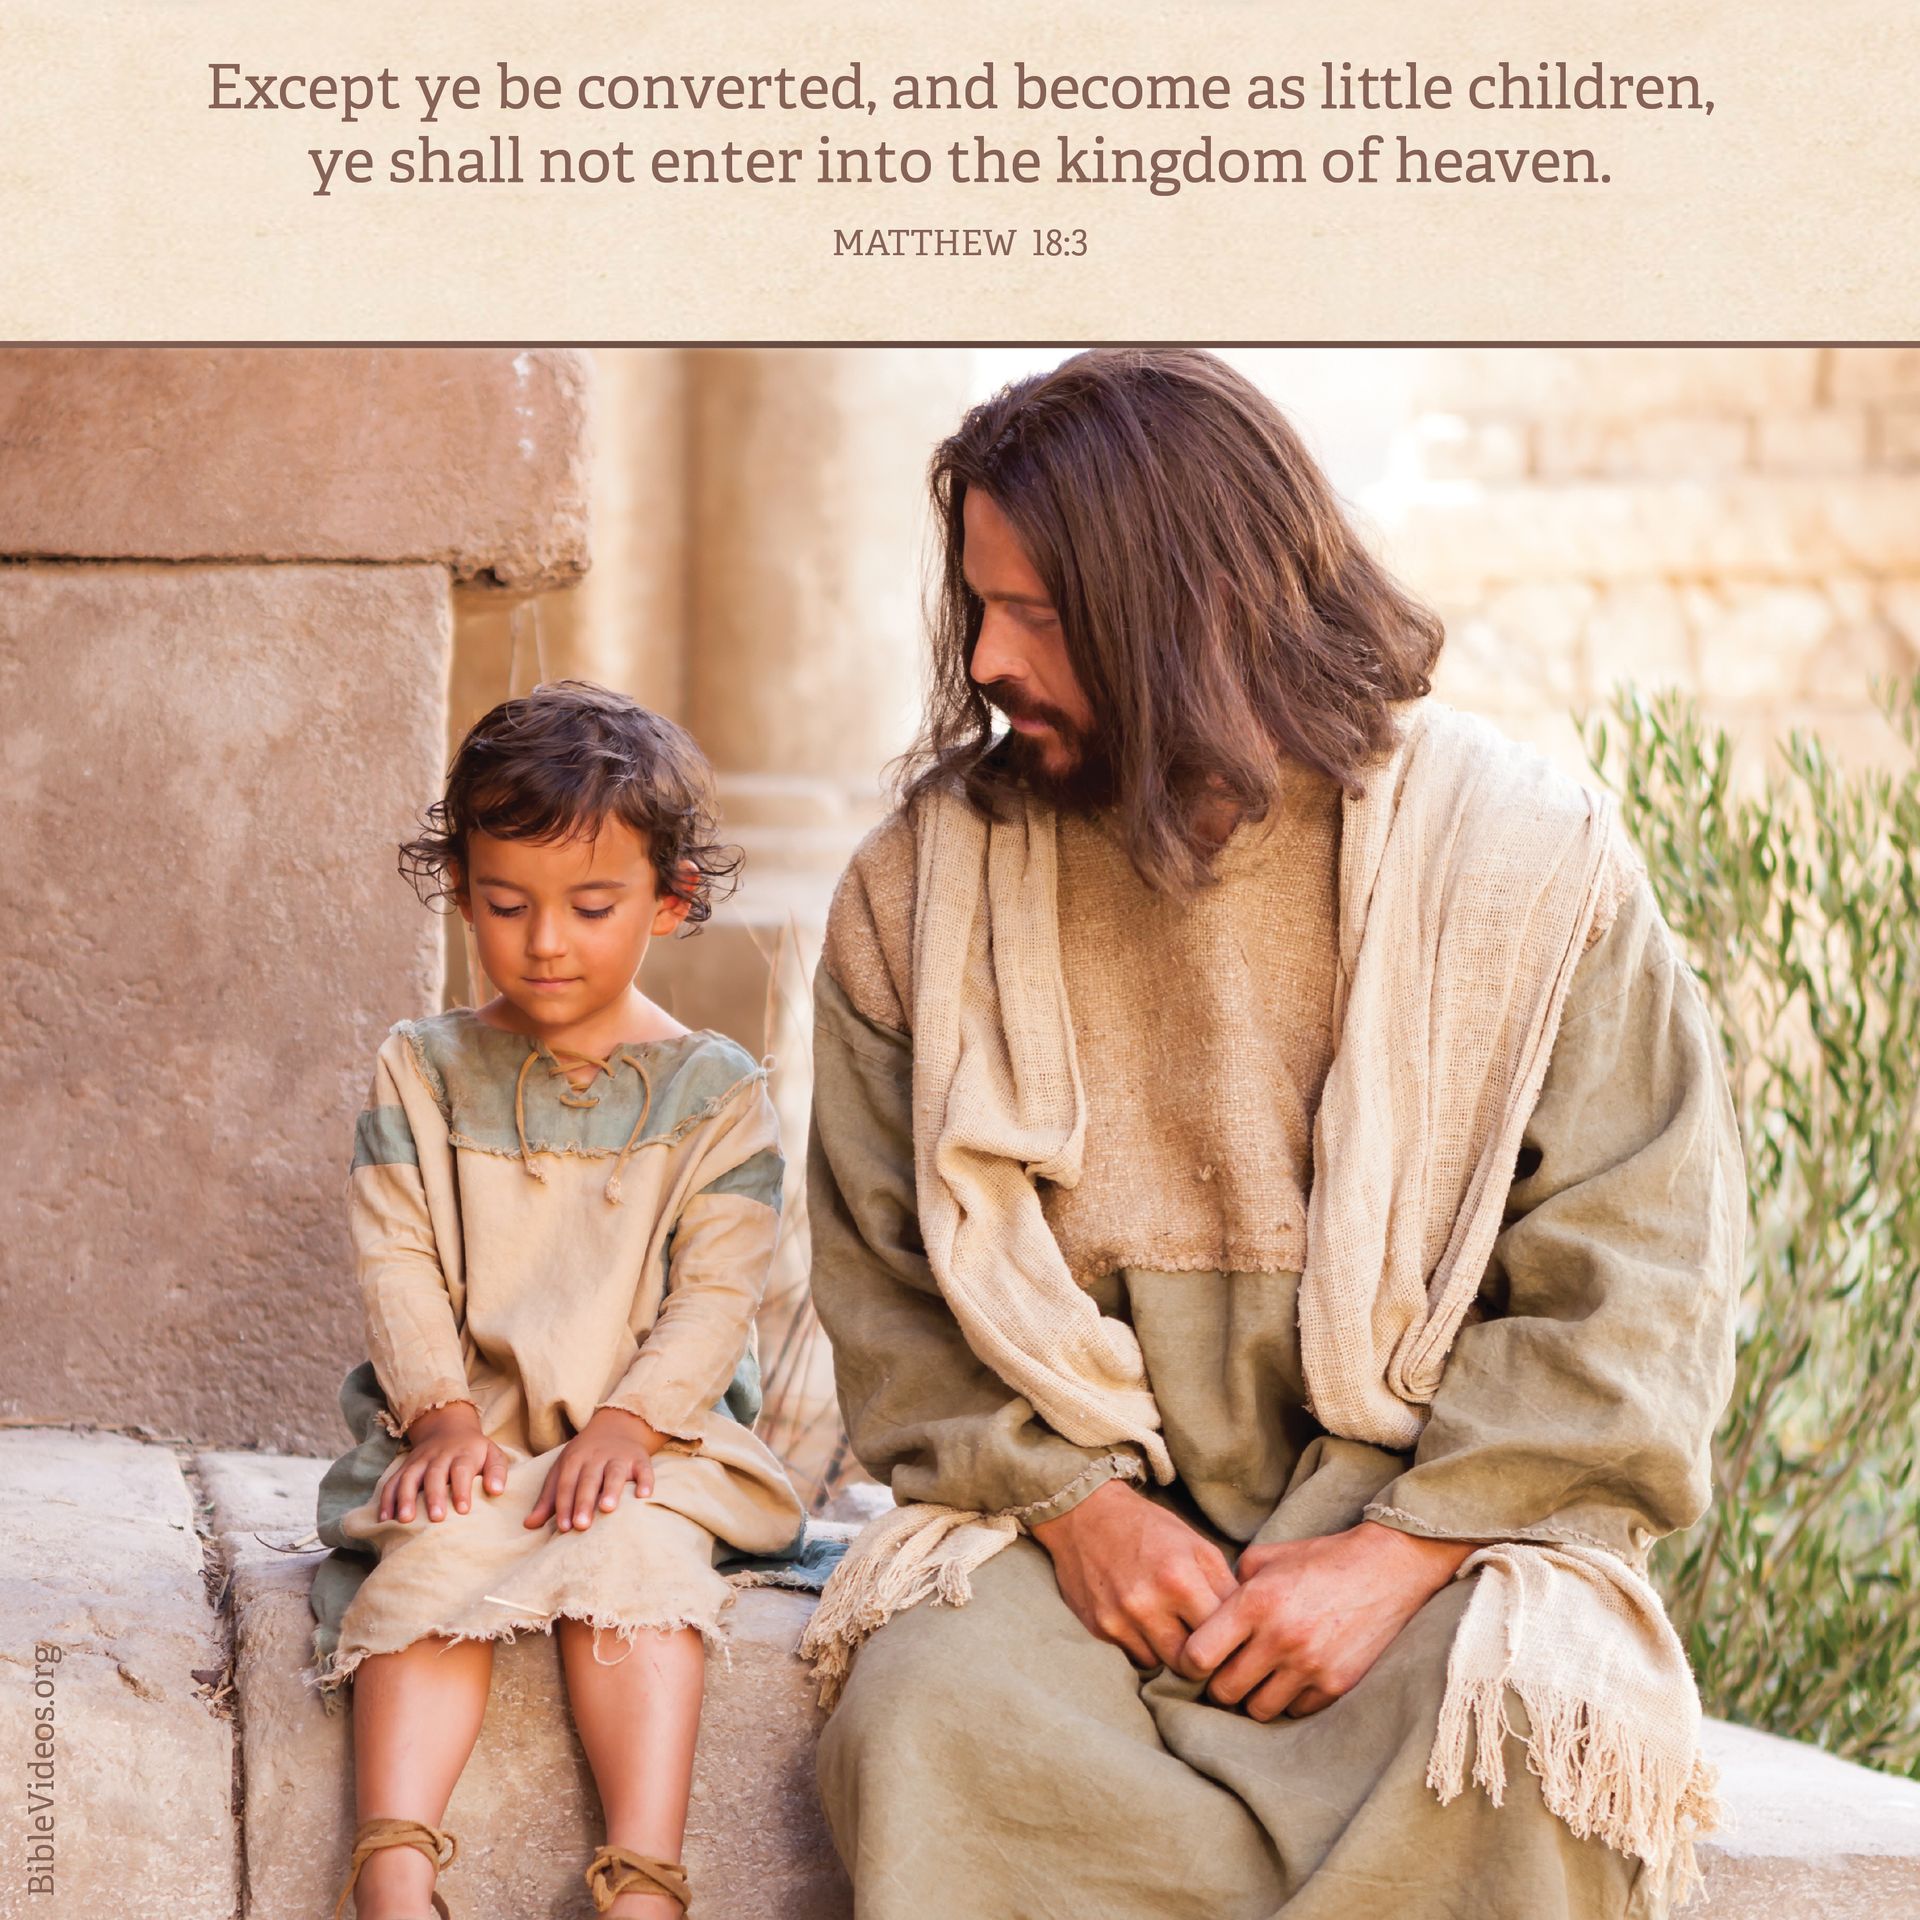 “Except ye be converted, and become as little children, ye shall not enter into the kingdom of heaven.”—Matthew 18:3